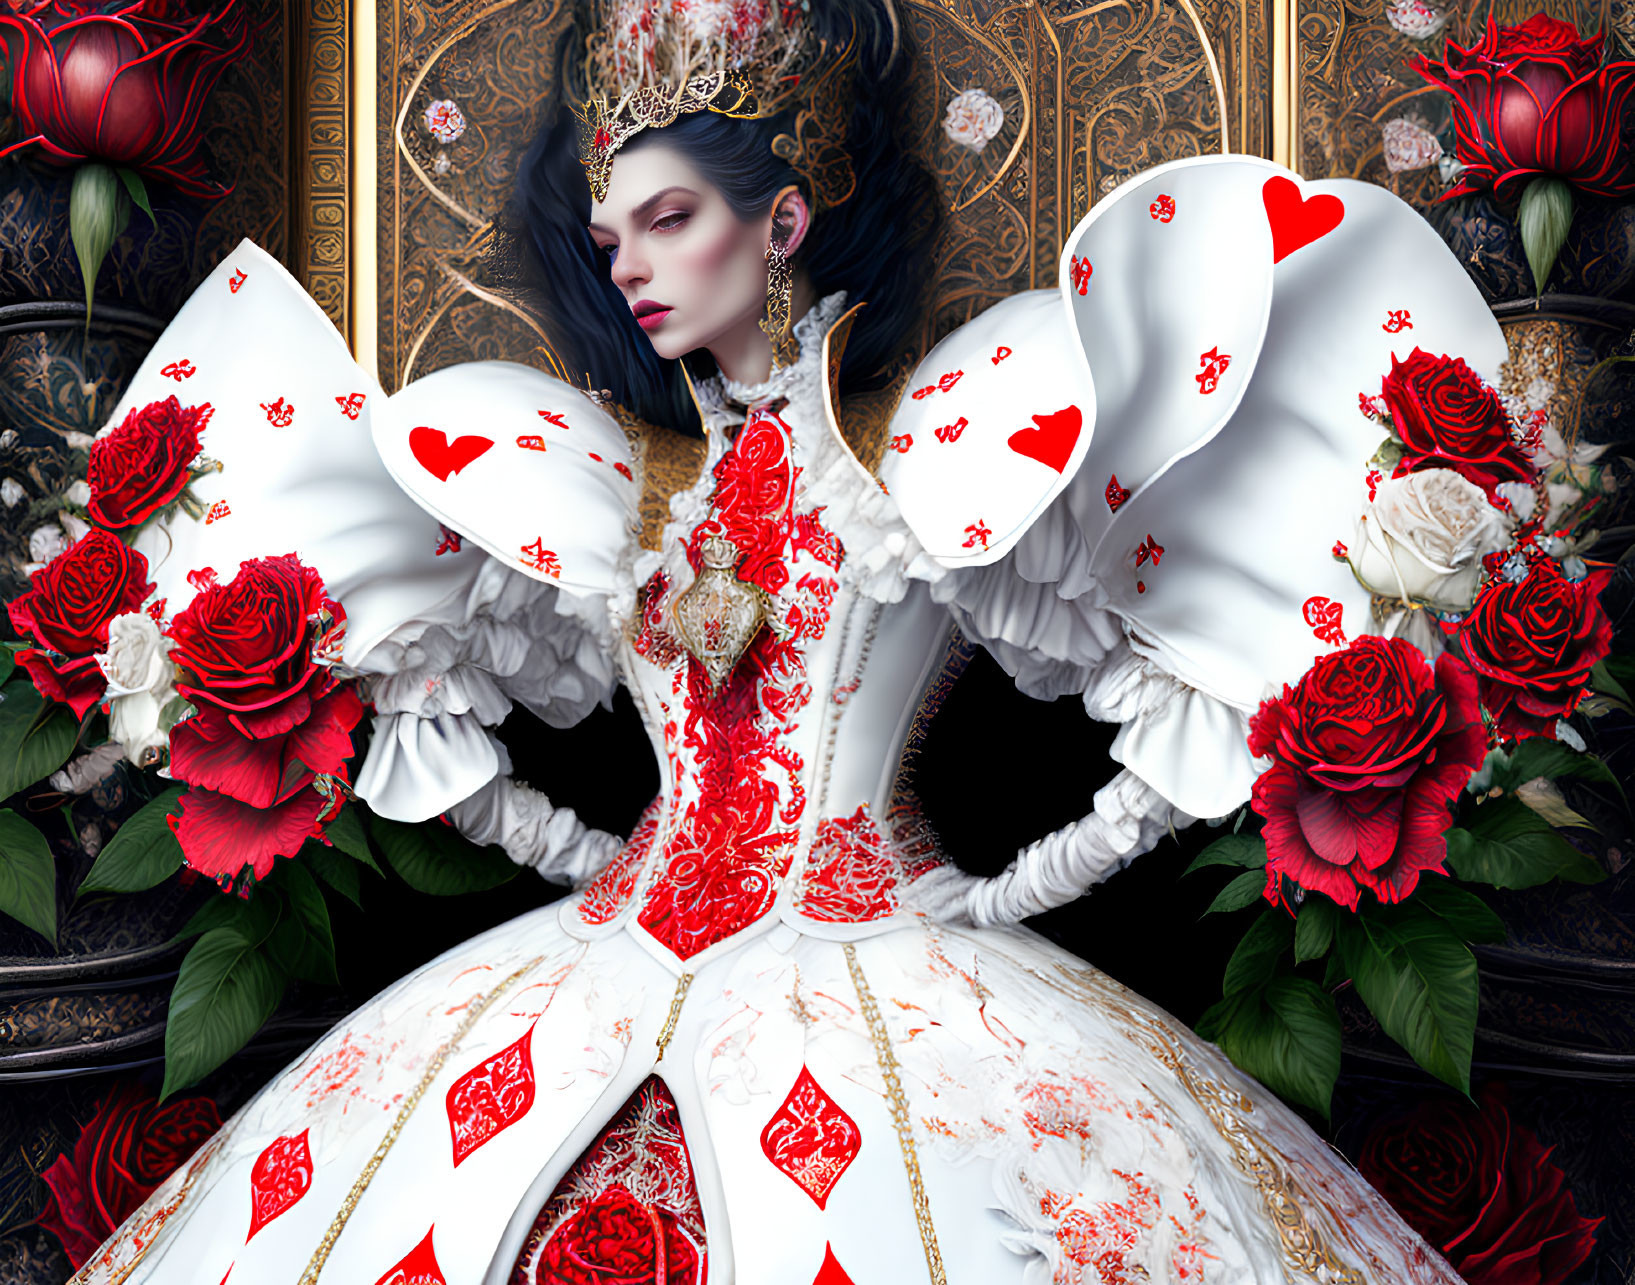 Elaborate red and white dress with playing card and rose motifs on woman in queen's crown against